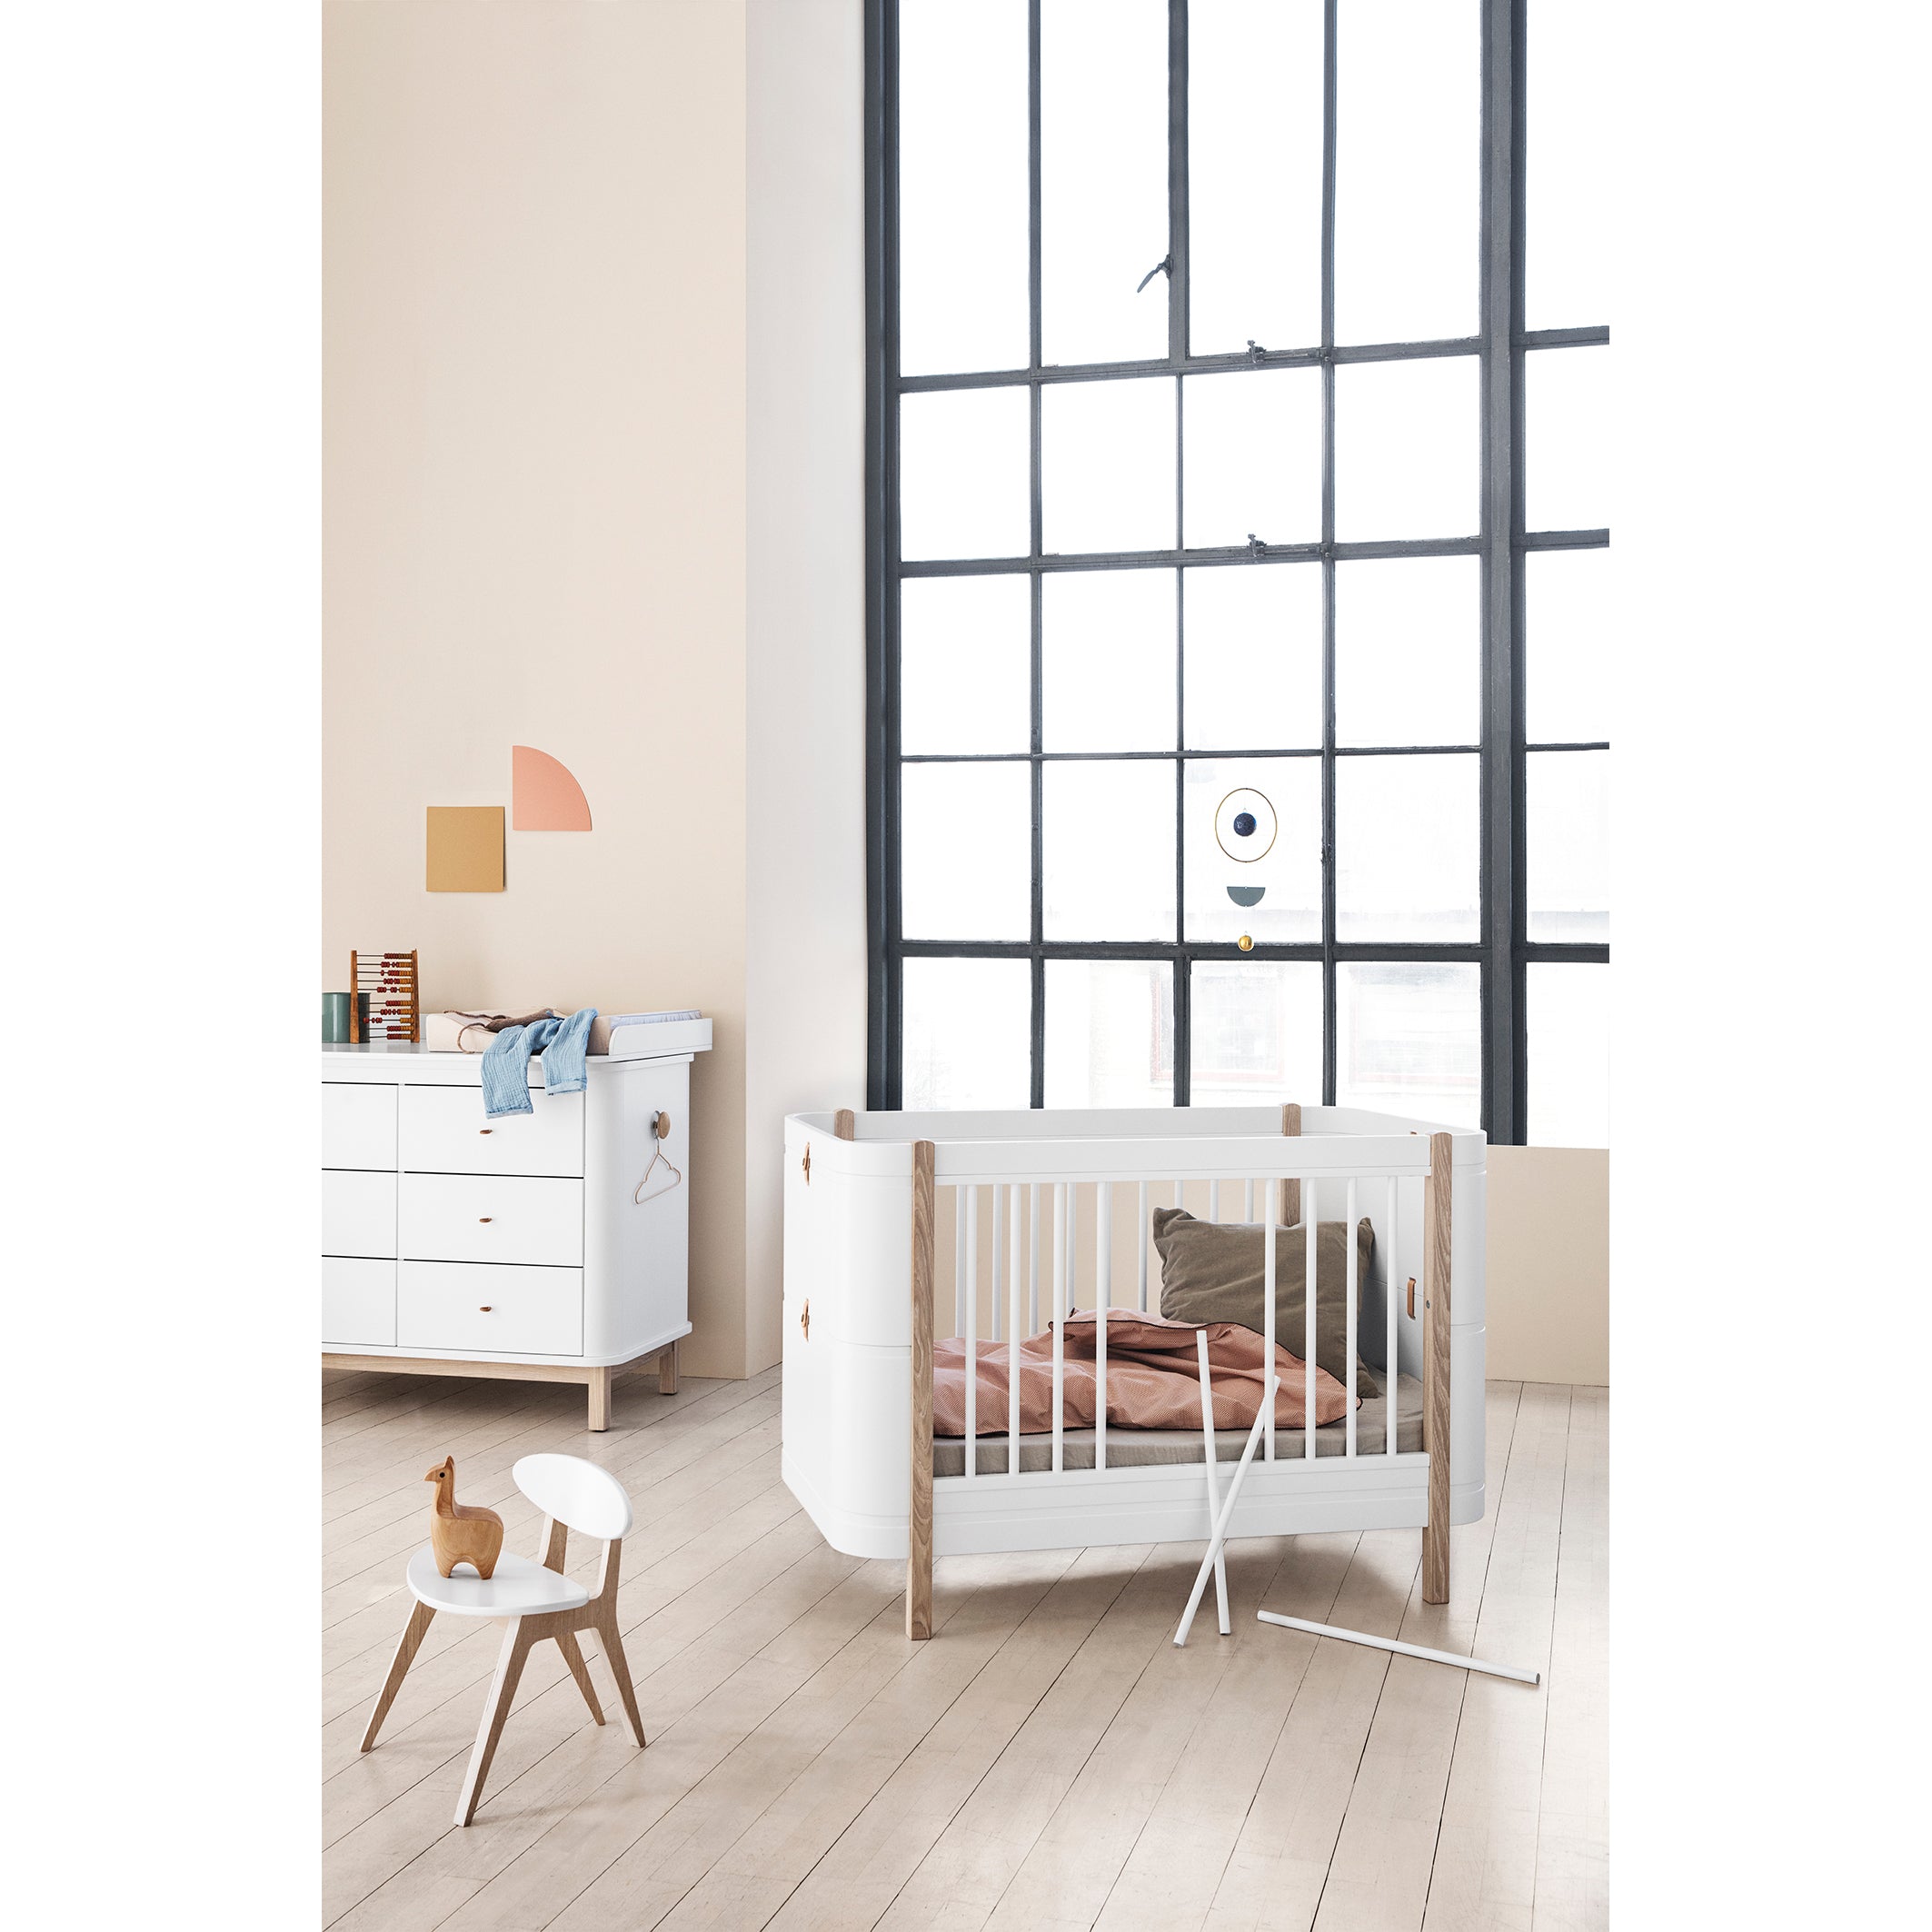 Oliver Furniture Wood Mini+ Cot Bed (With Junior Conversion Kit) - White/Oak